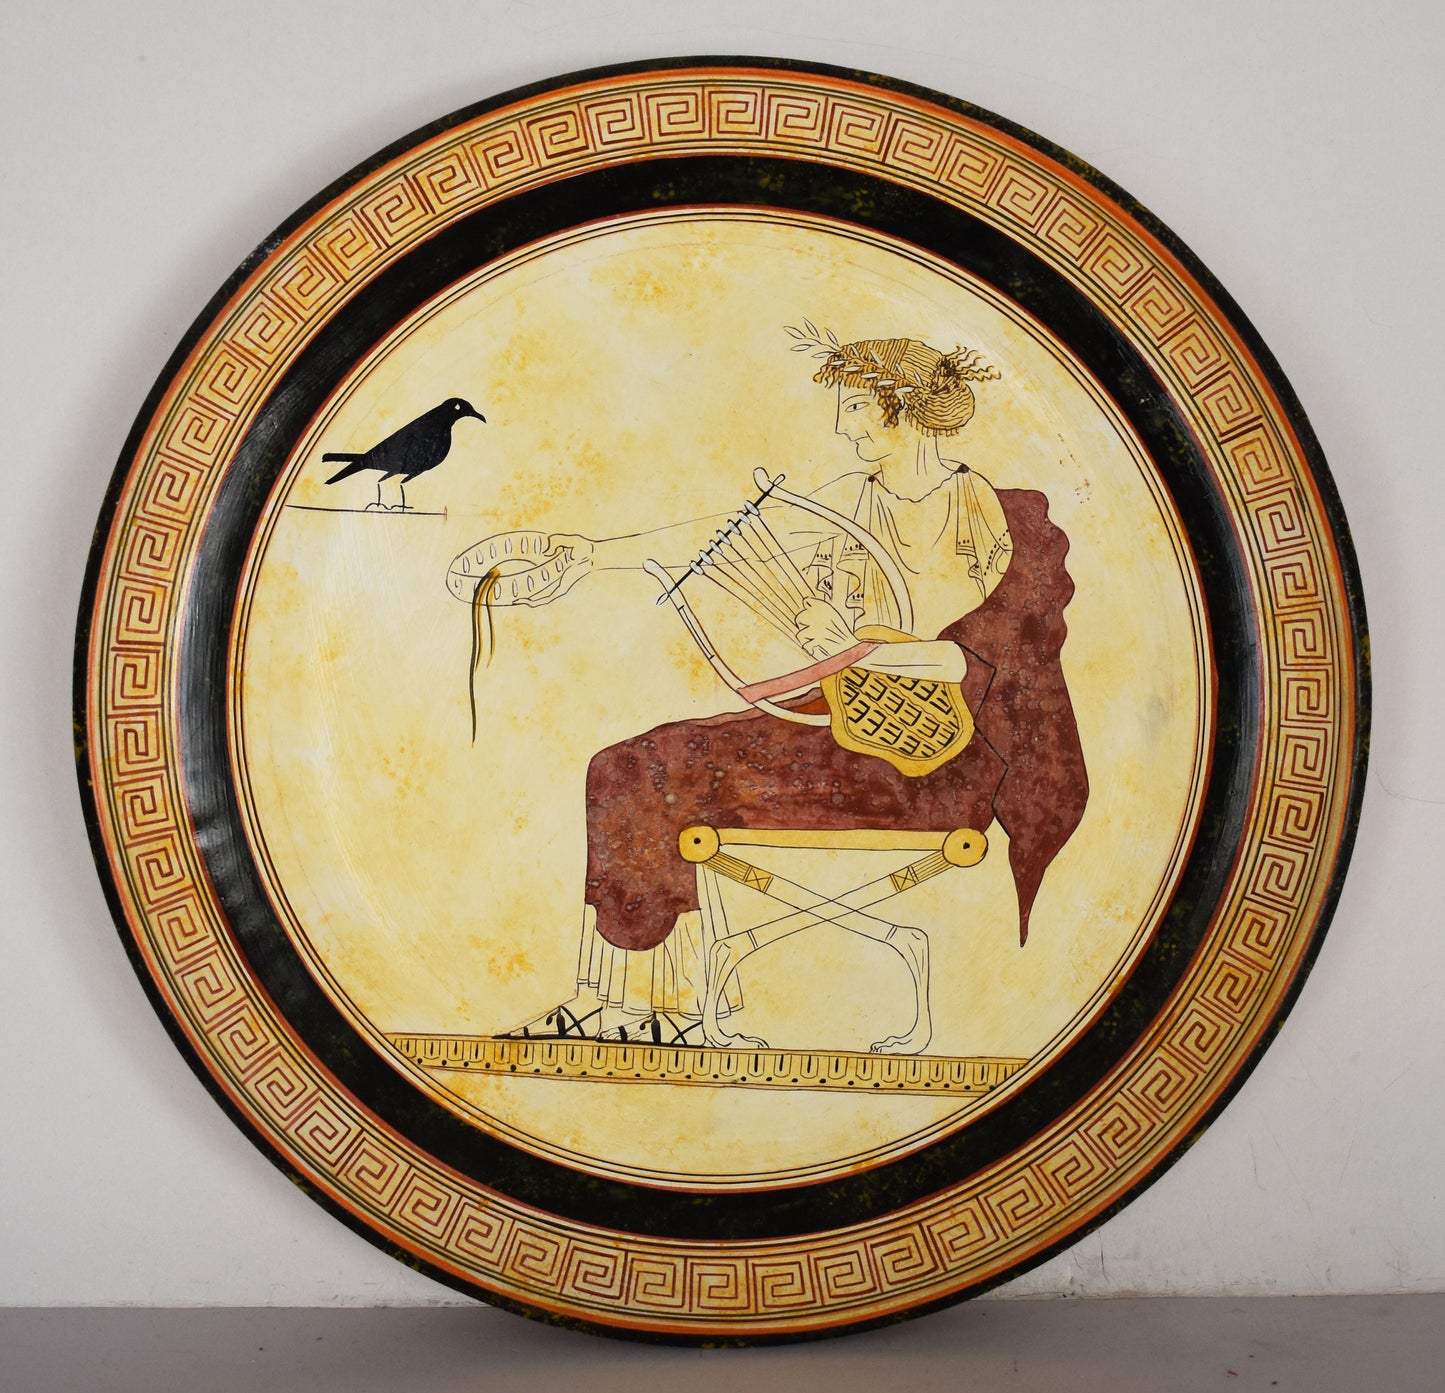 Apollo and Crow - Fragment from Delphi - Libation Offer - Attic Period - 470 BC - Meander Motif - Ceramic plate - Handmade in Greece